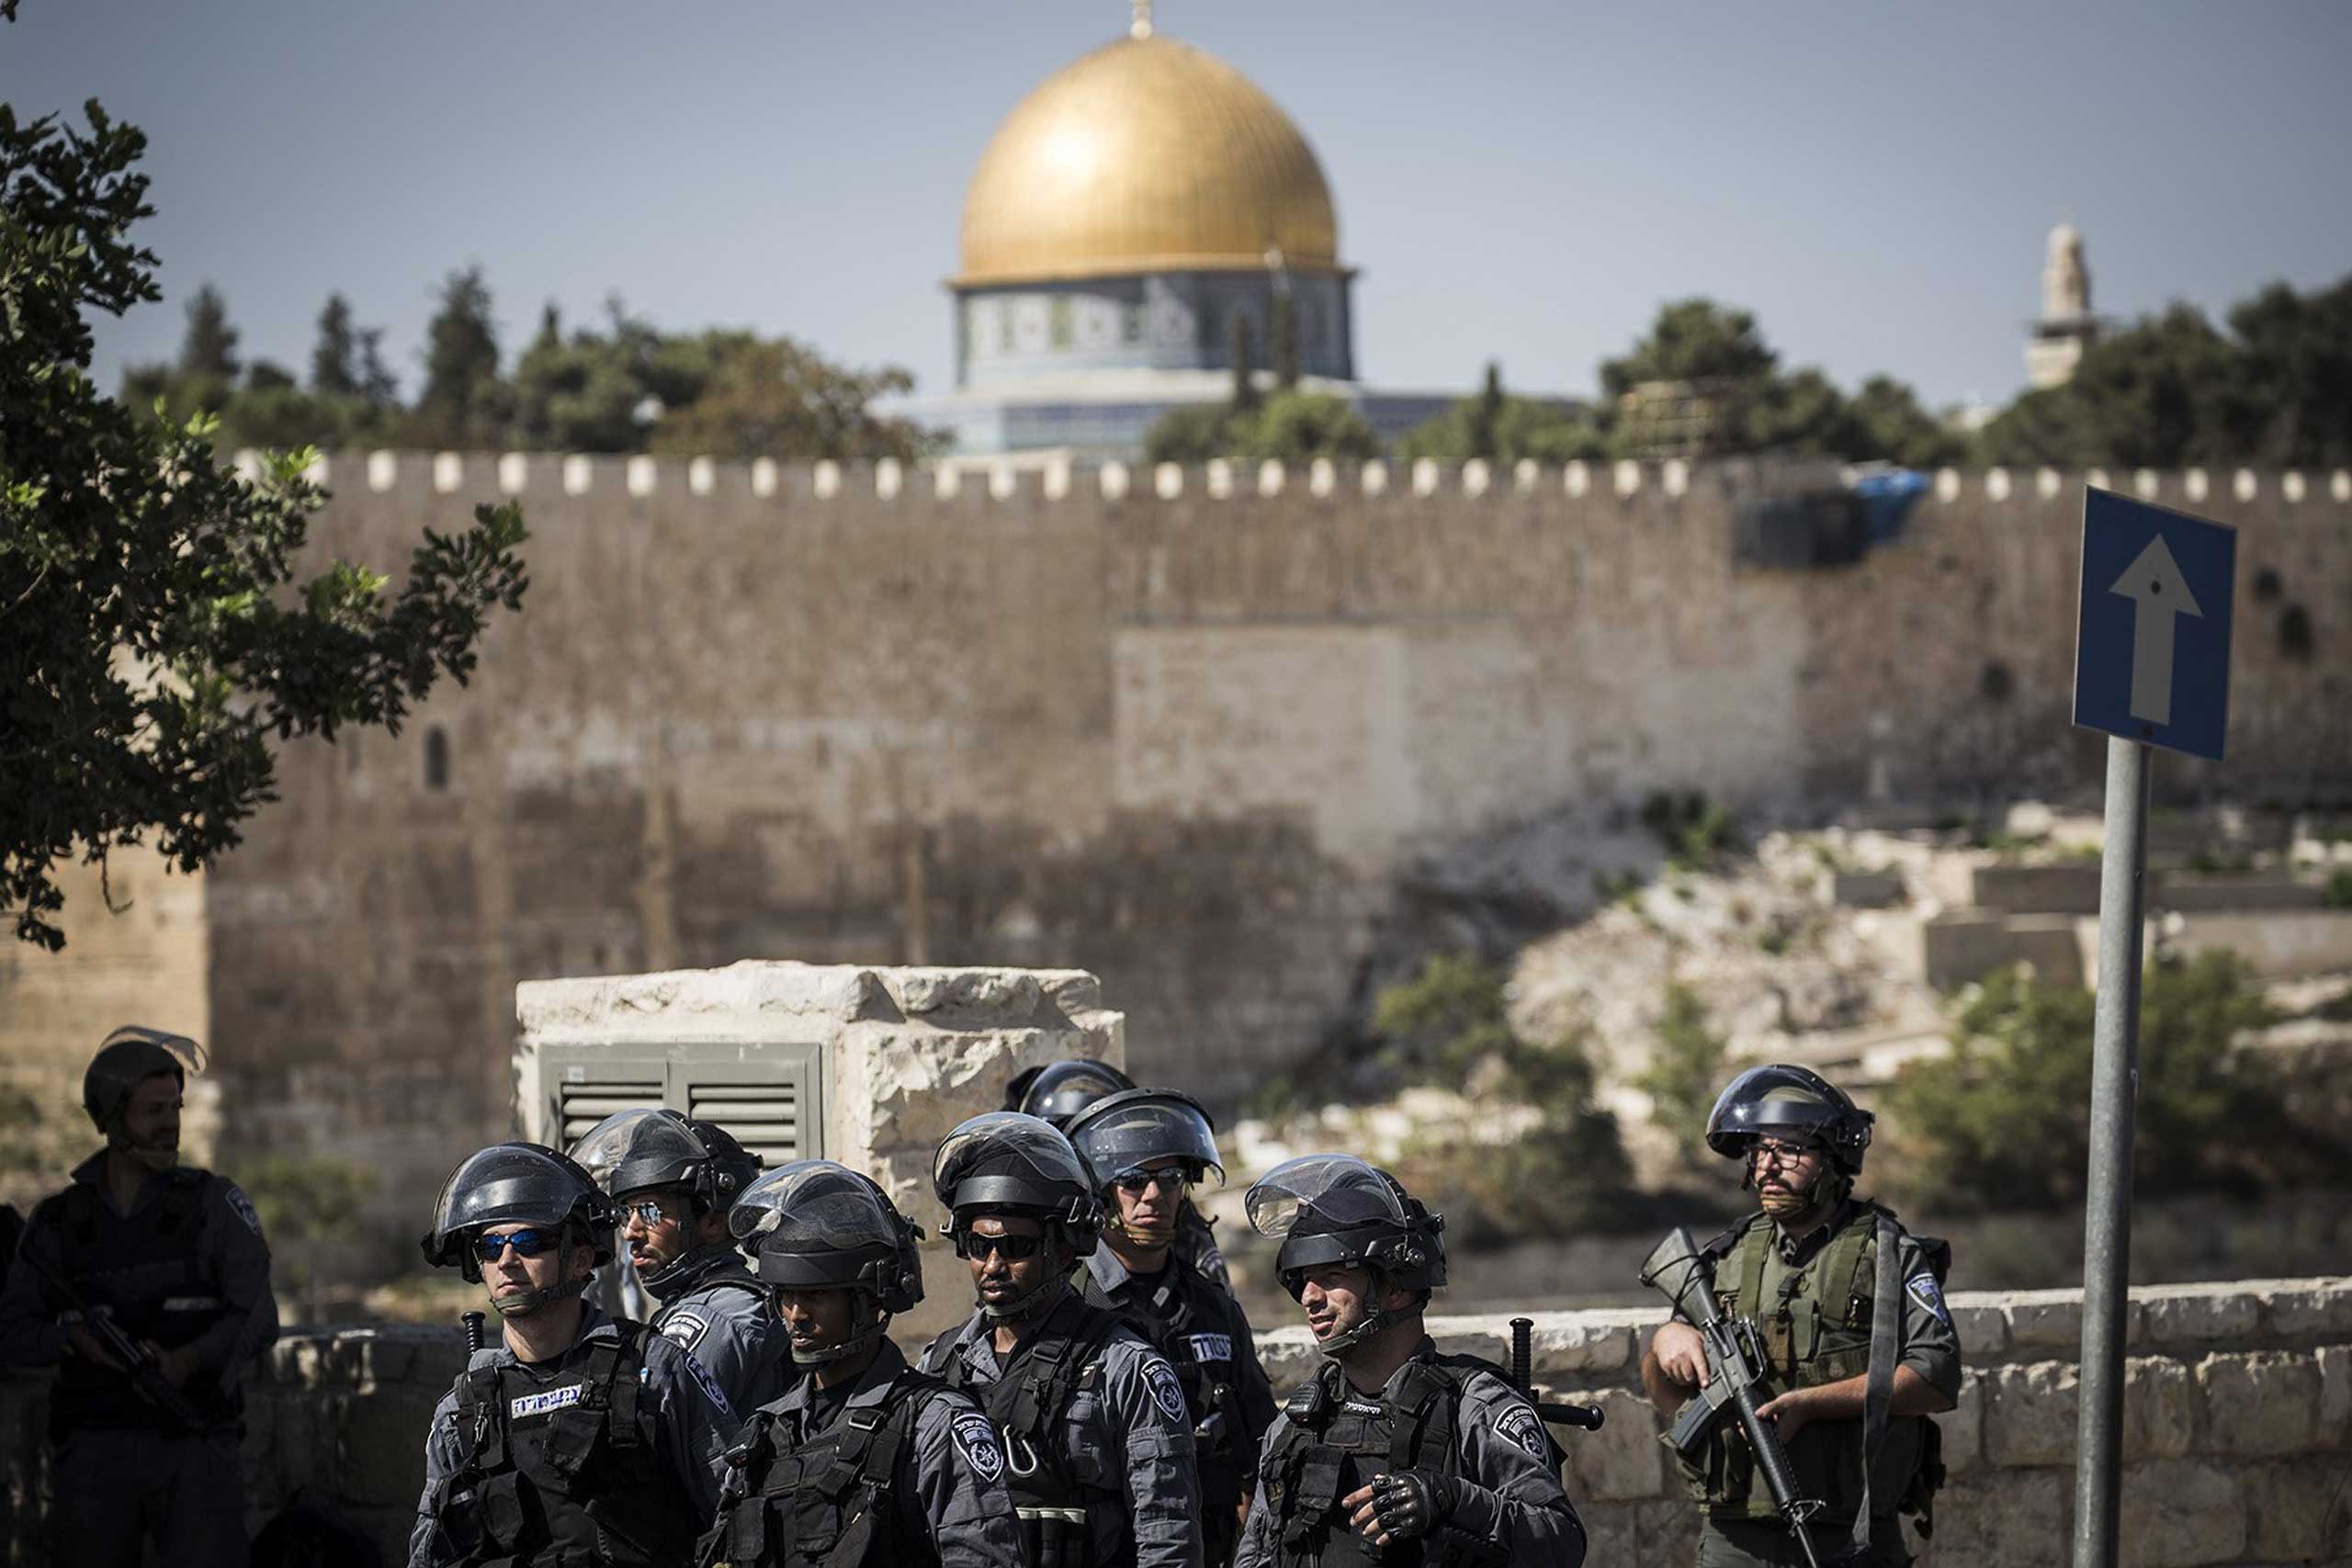 Israeli security forces look on during a noon Friday prayer outside Ras Al Amud neighborhood in Jerusalem, on Oct. 16, 2015. (Ilia Yefimovich—Getty Images)